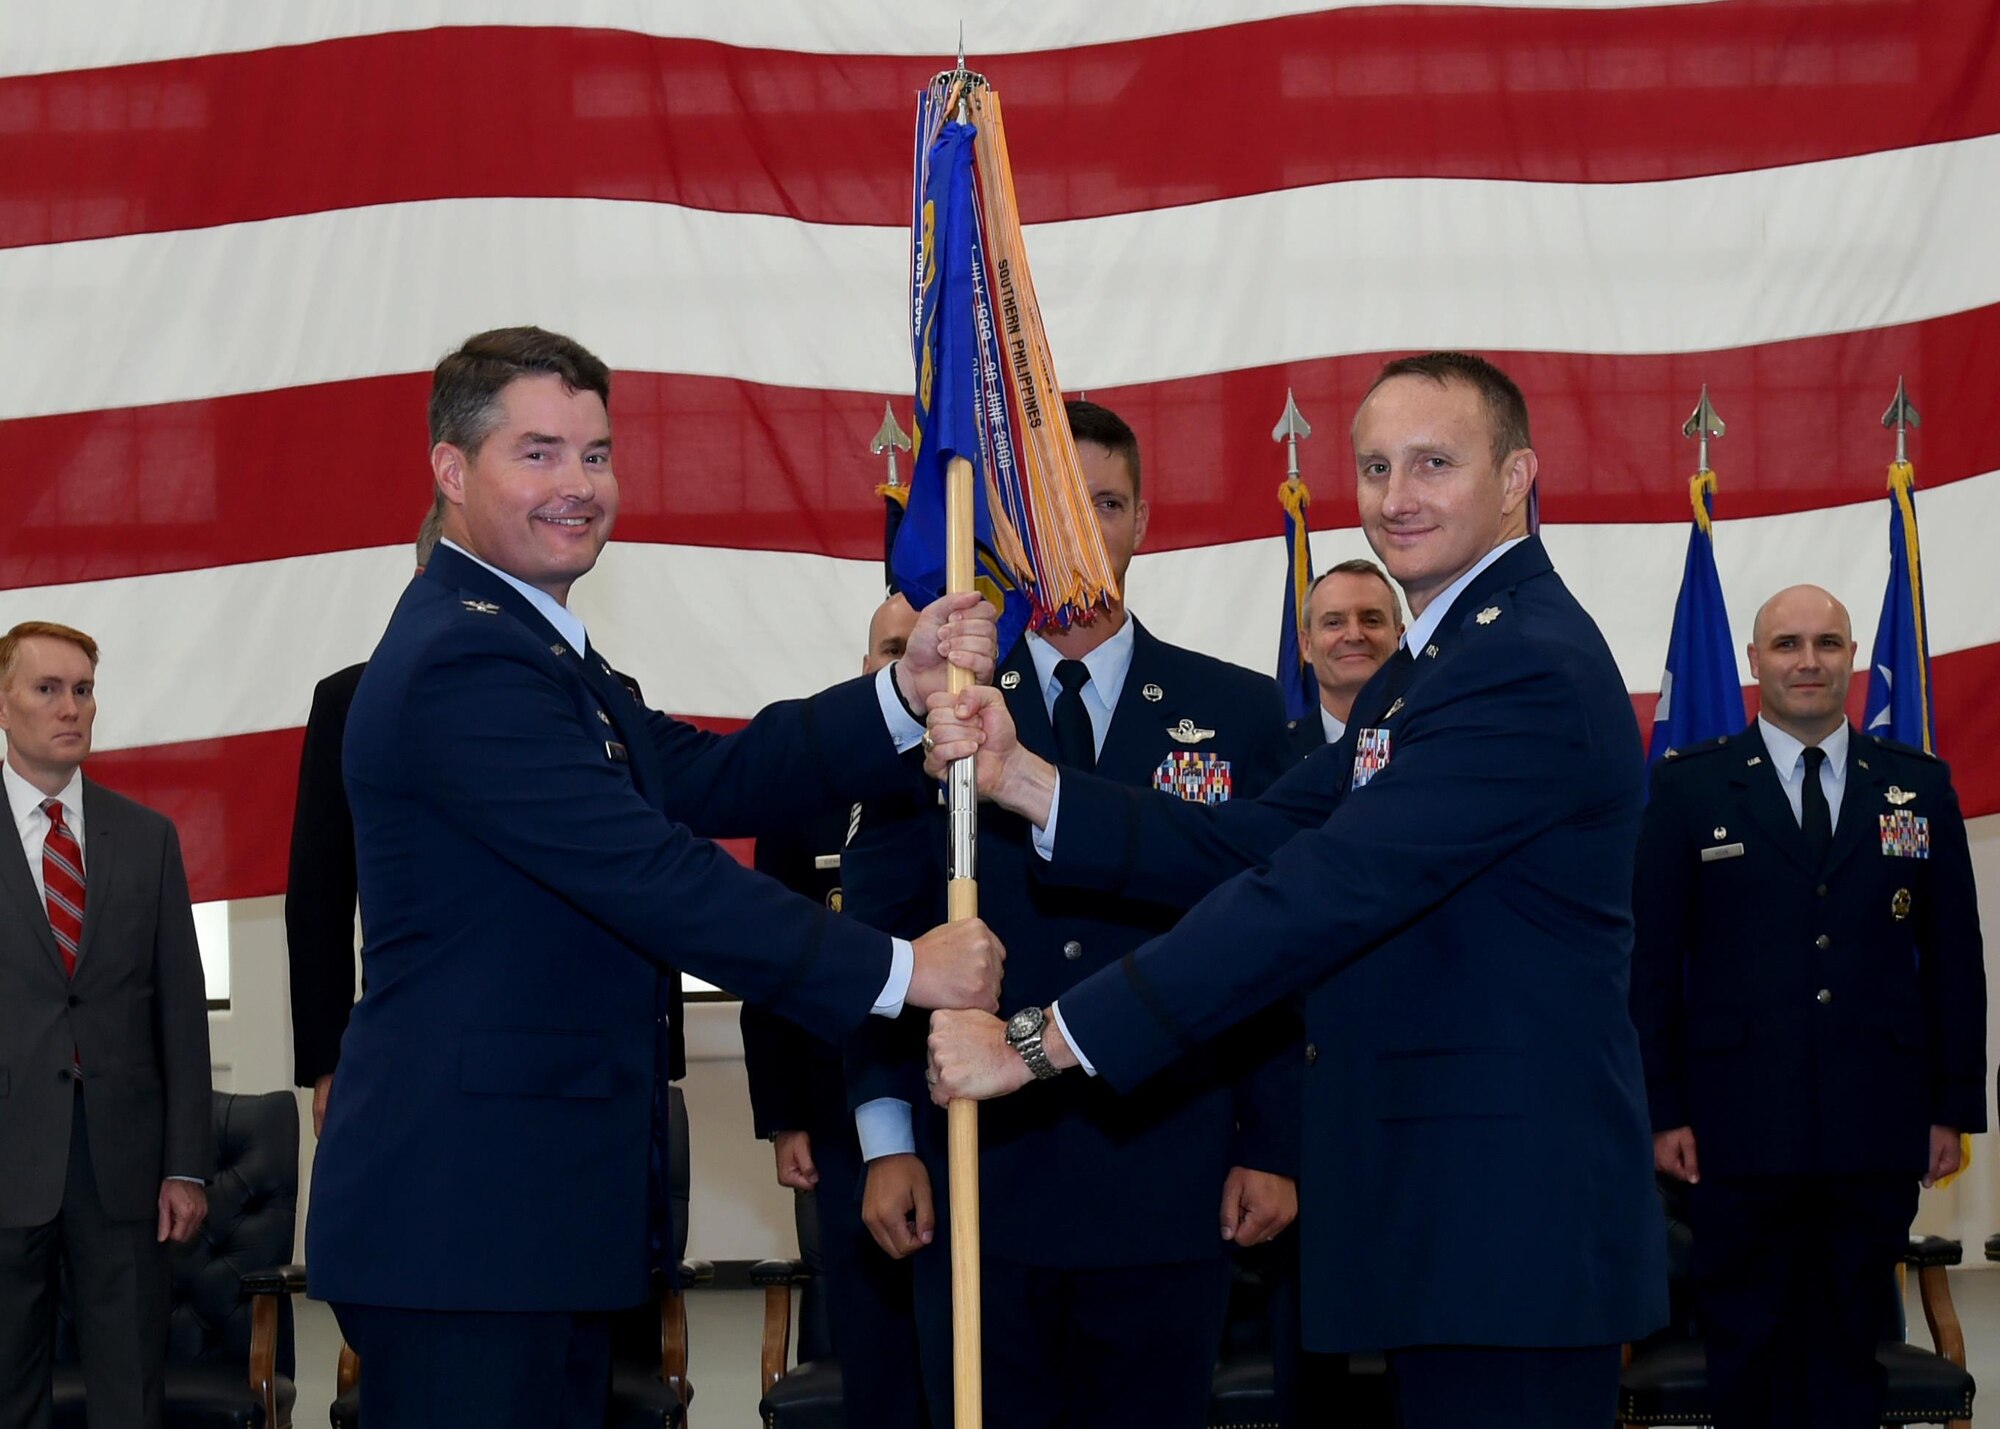 U.S. Air Force Col. Bryan Wood [left], 97th Operations Group commander, passes the guidon for the 56th Air Refueling Squadron to U.S. Air Force Lt. Col. Daniel Ruttenber [right], 56th ARS commander, during the “Forging the 46” ceremony, Aug. 30, 2016, at Altus Air Force Base, Okla. The event consisted of an assumption of command for the reactivated 56th ARS, dedication of the new KC-46 training facility, speeches from key Air Force and community leaders and concluded with a tour of the new facility for attendees. (U.S. Air Force photo by Airman 1st Class Kirby Turbak/Released)   